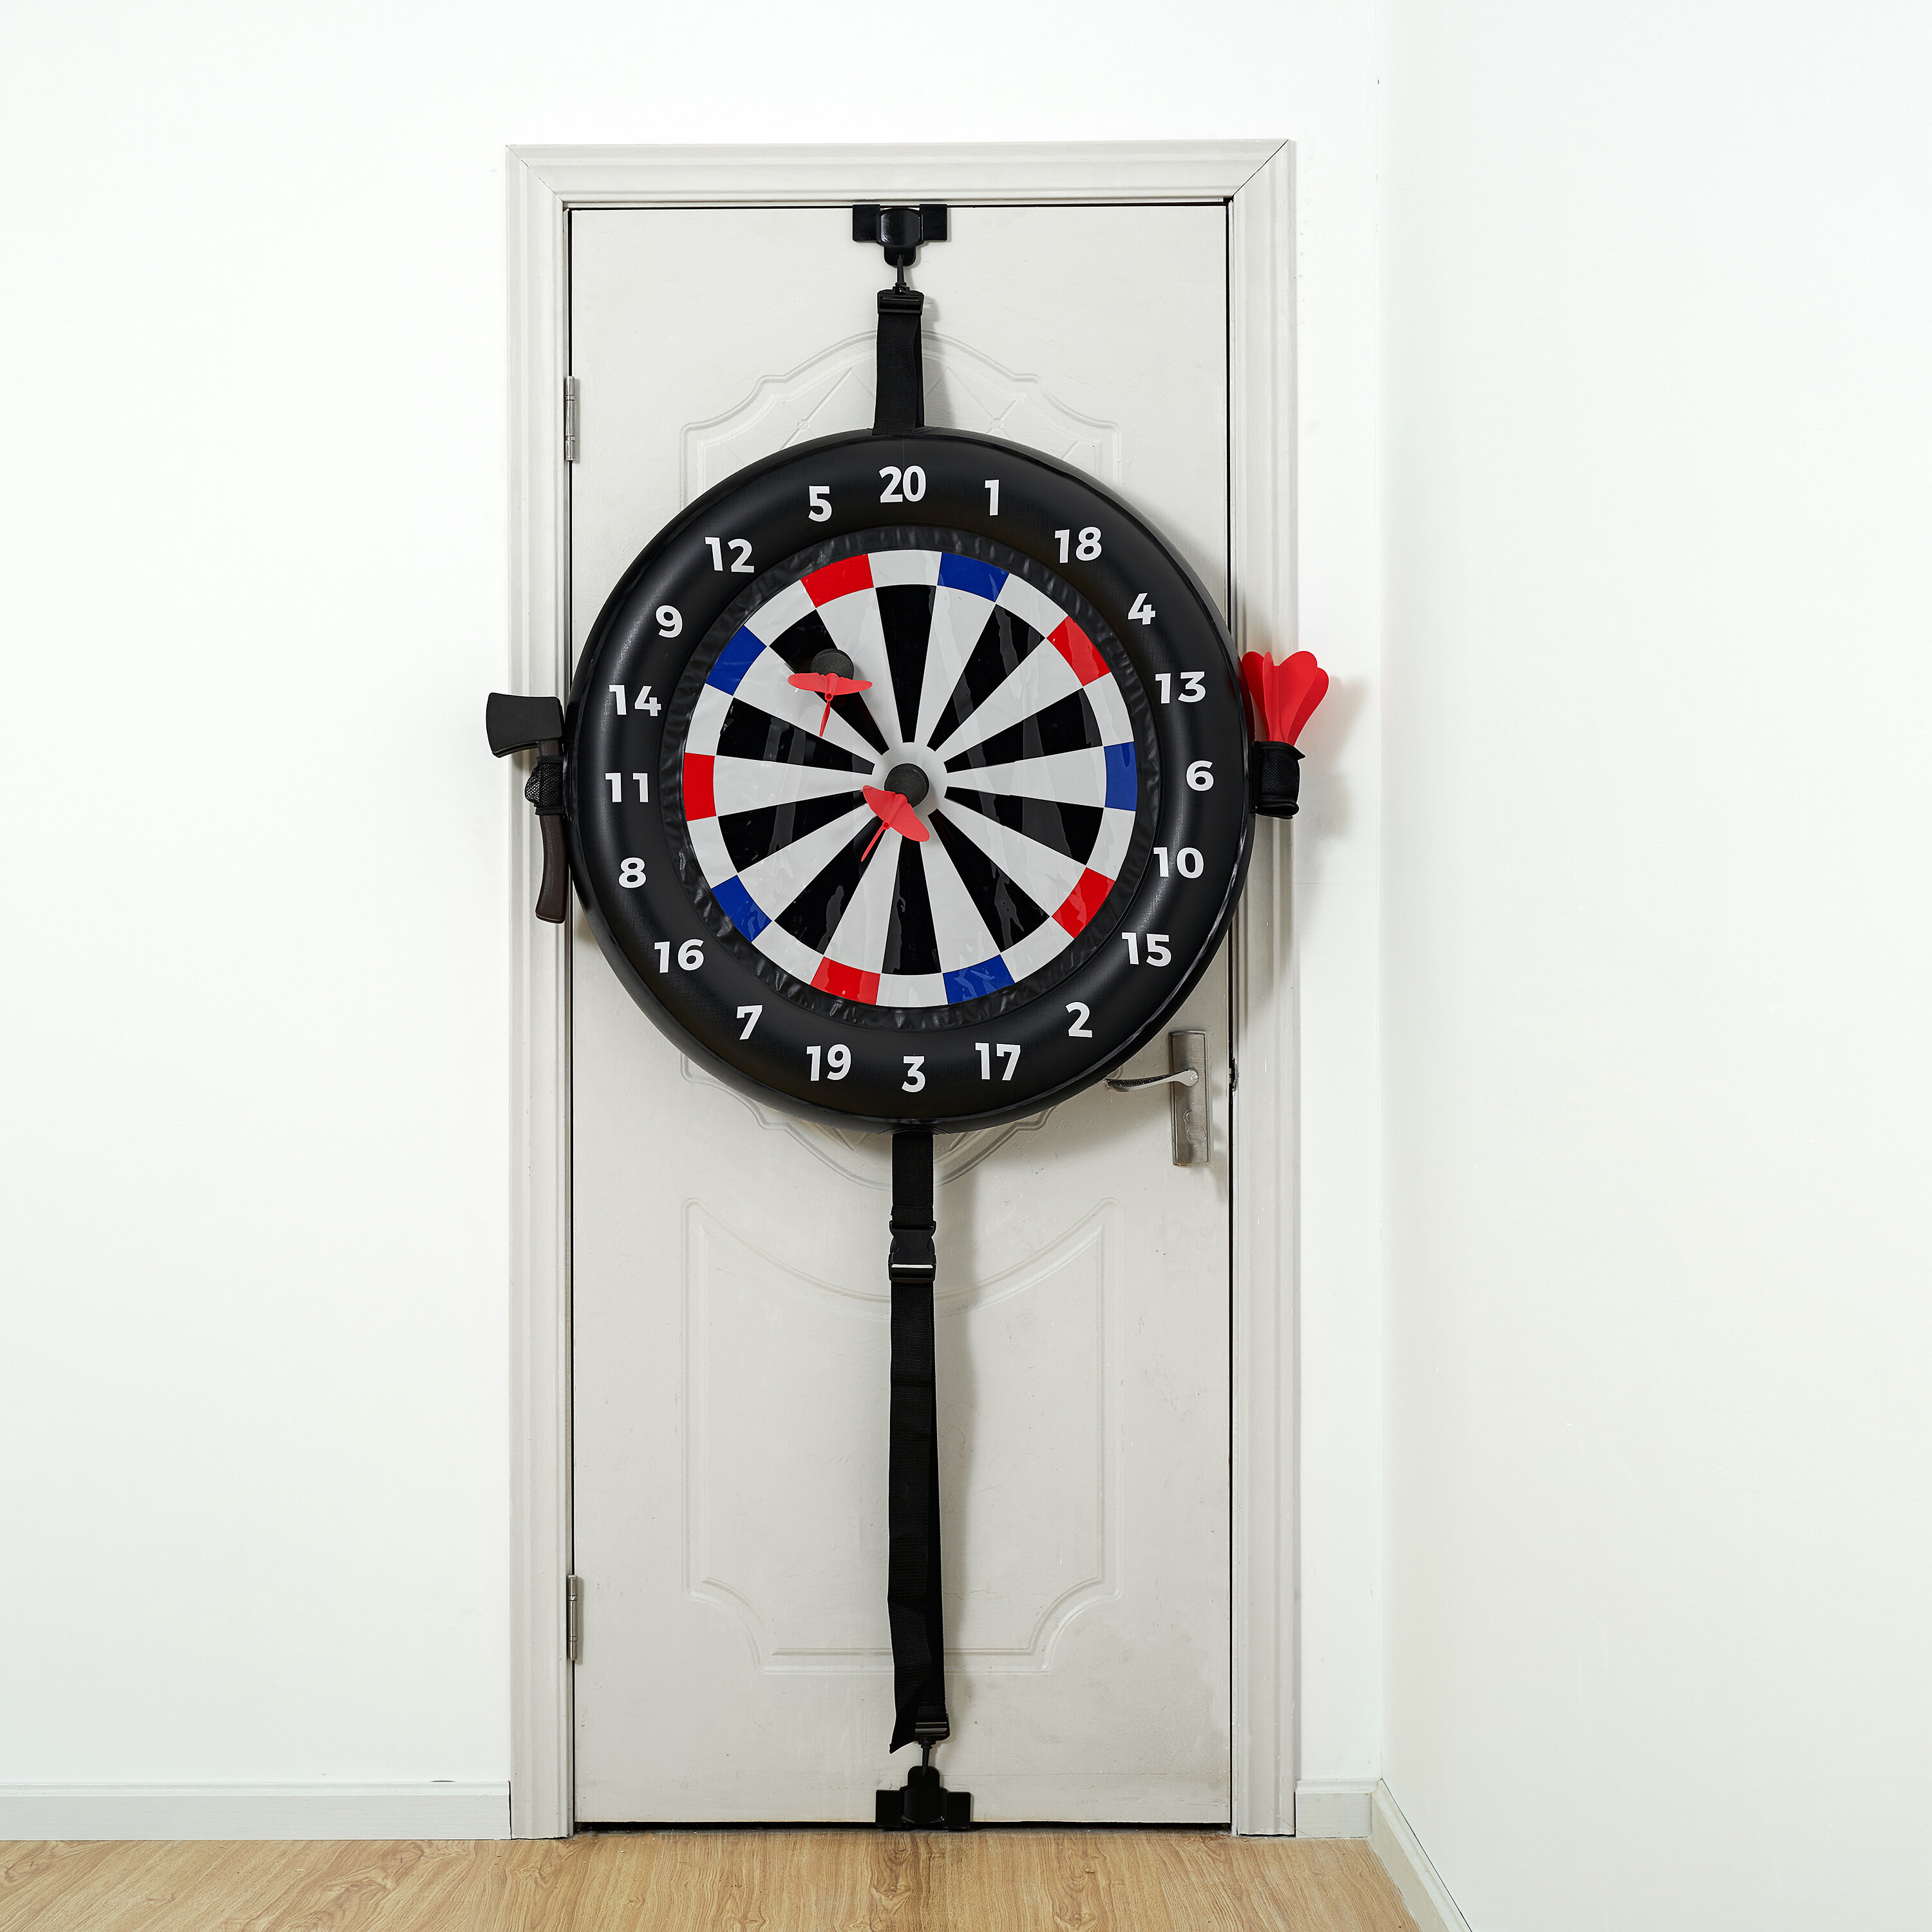 17" Magnetic Dart Board Dartboard 6 Dart Double Side Set Roll Up Tip Aiming Game 